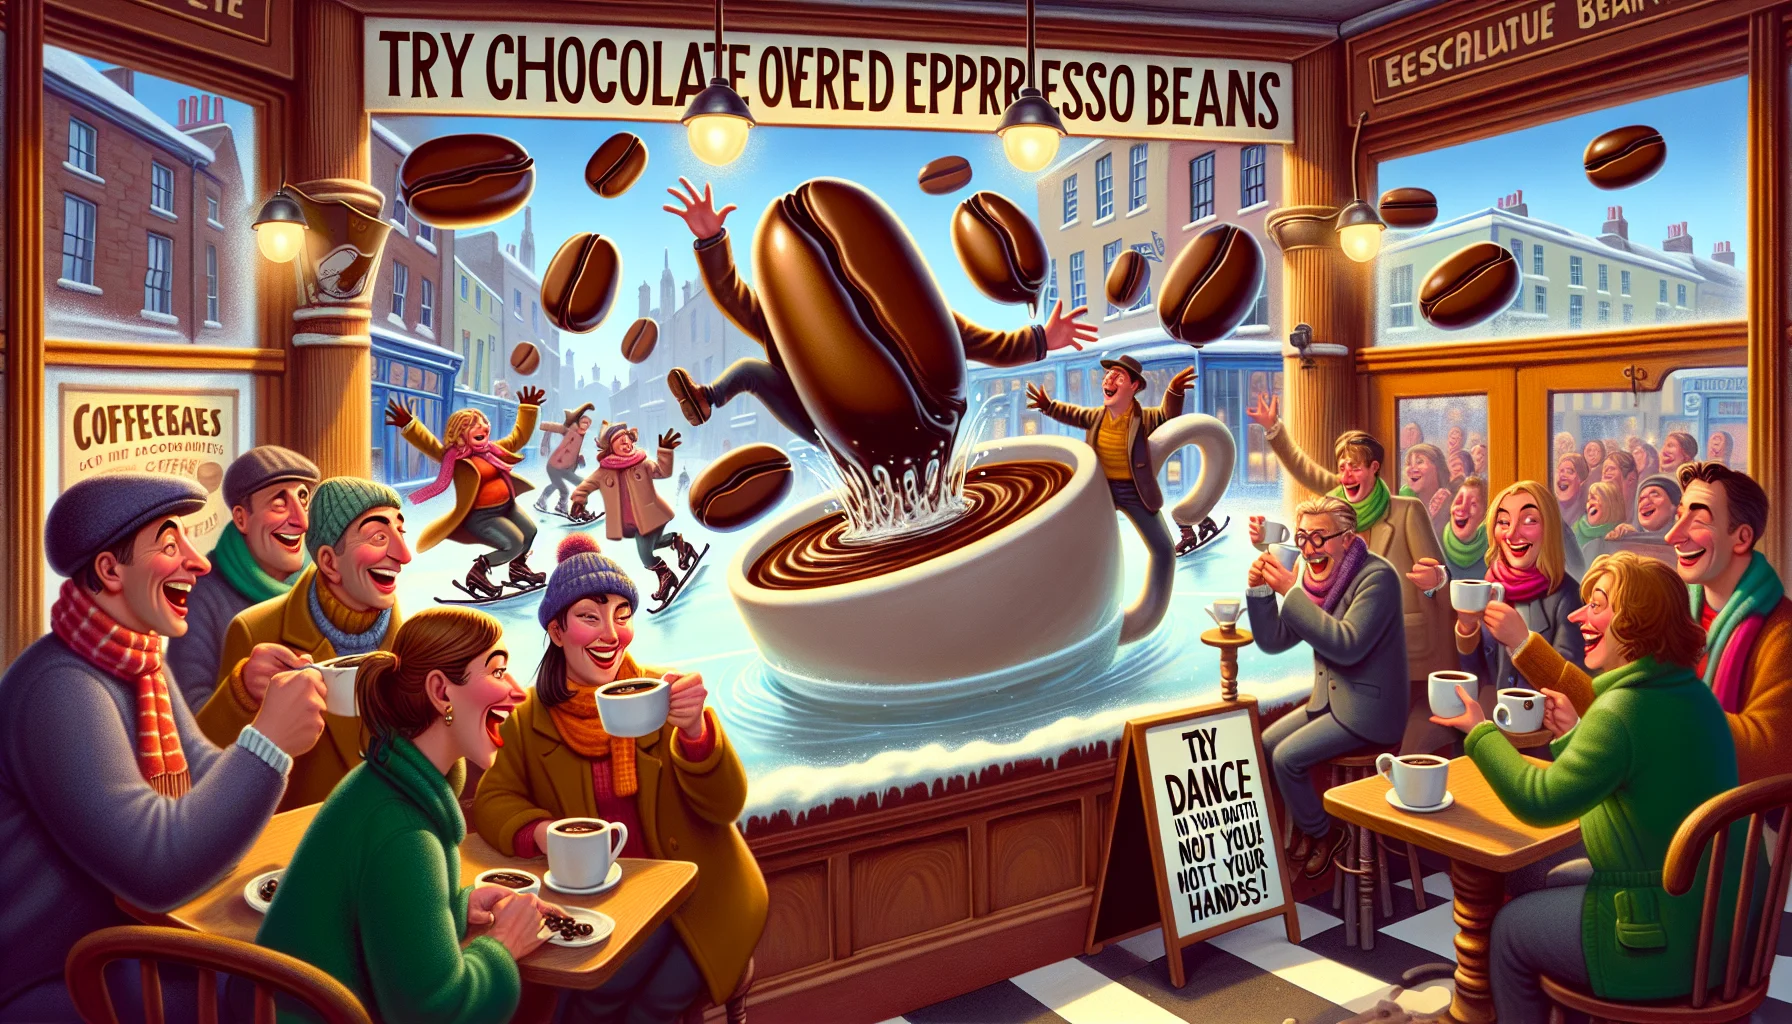 Create an image of a whimsical cafe scene that's designed to entice people to enjoy chocolate covered espresso beans. In this scene, a group of people of various descents and genders are jovially partaking in coffee drinks. Overhead, an exaggerated display shows gigantic chocolate-covered espresso beans skating around on mugs of steaming coffee as if they're icy ponds. A sign nearby humorously suggests 'Try our lively beans - they dance in your mouth, not your hands!' The vibe is cozy and warm, matching the rich colors of the chocolate and the espresso beans.